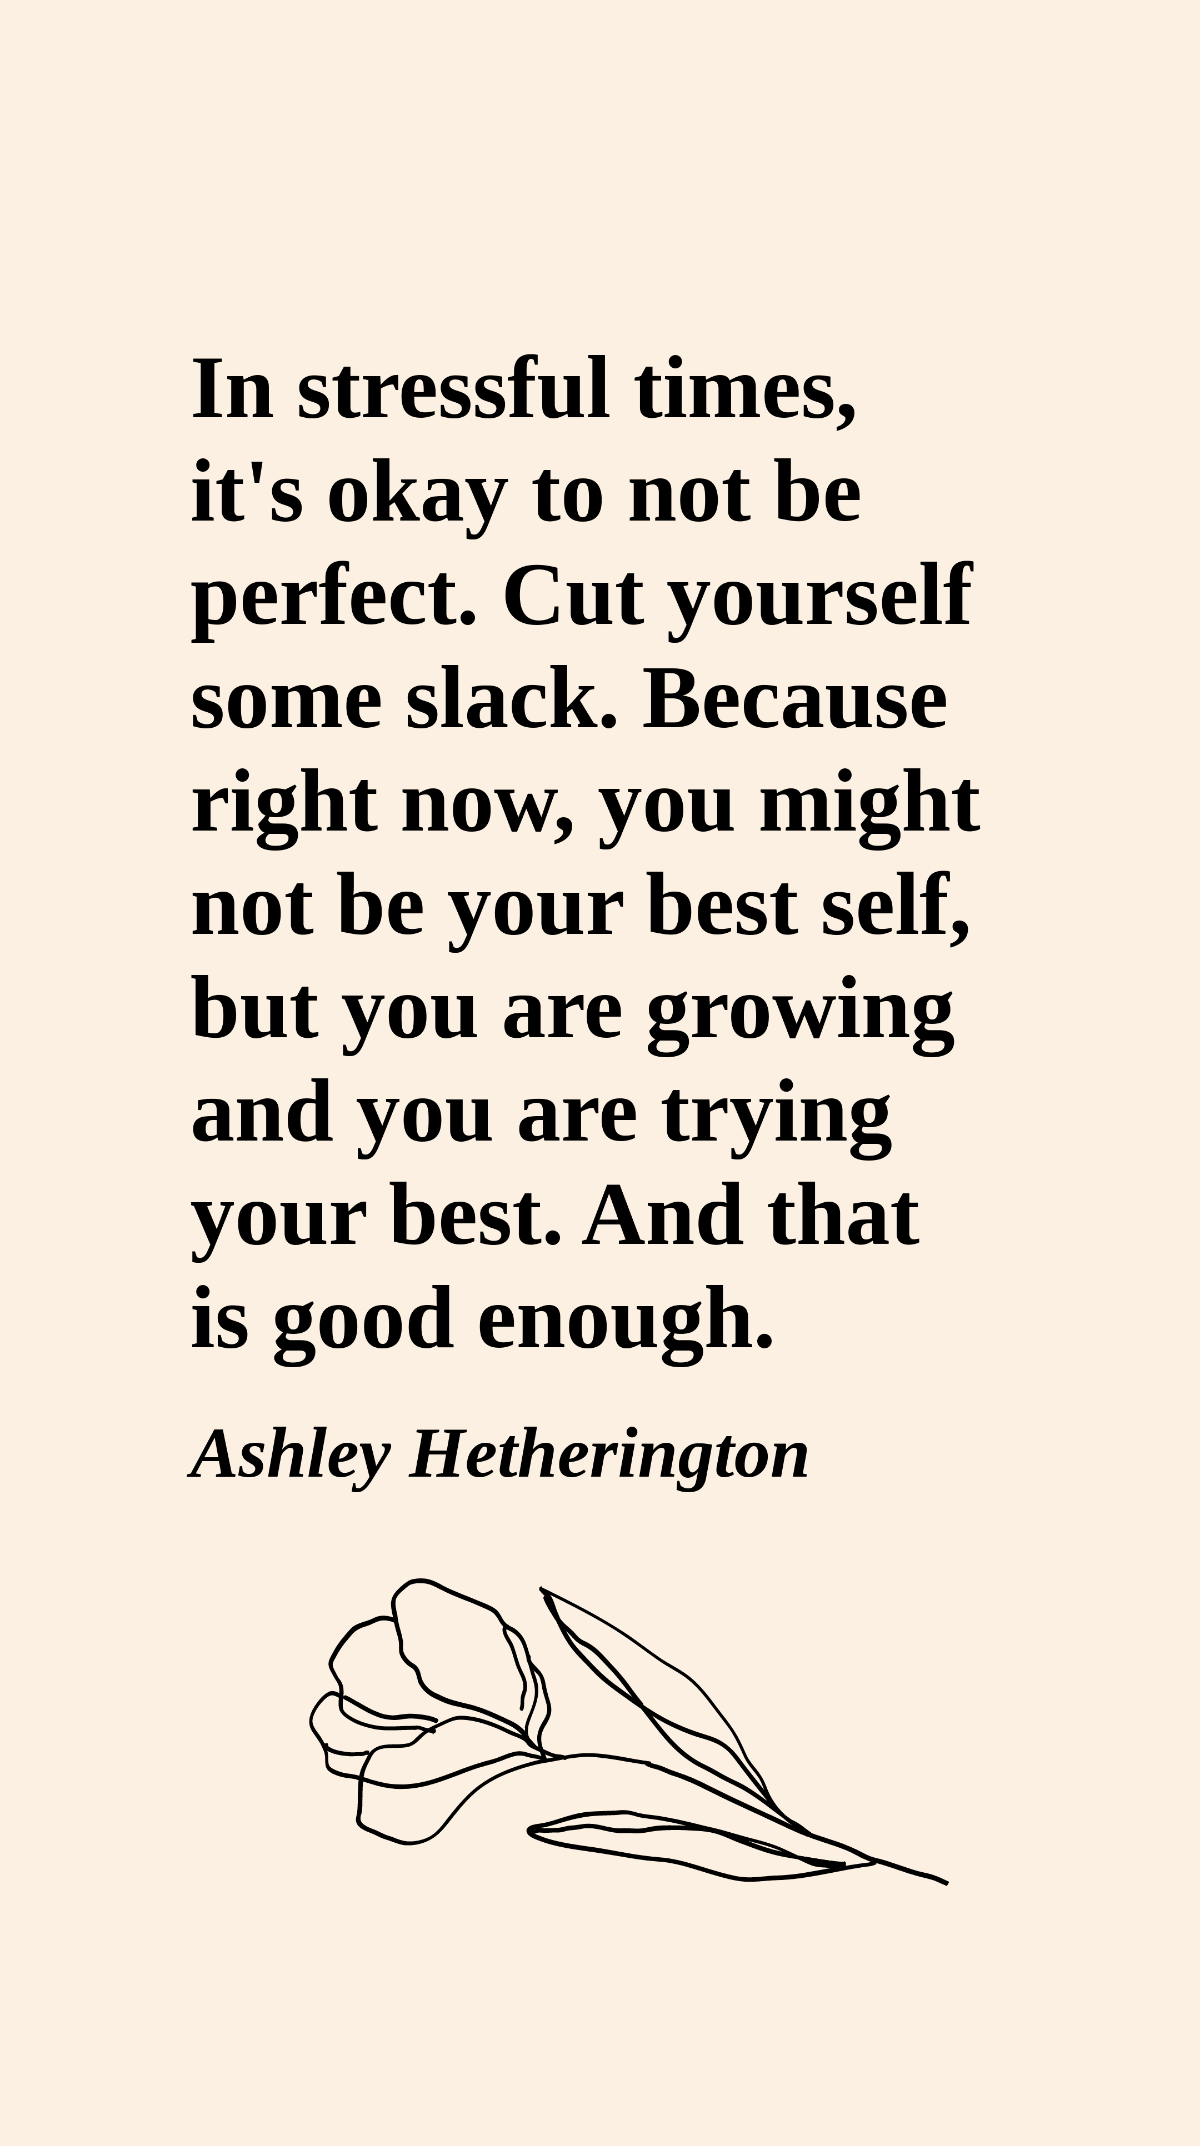 Free Ashley Hetherington - In stressful times, it's okay to not be perfect. Cut yourself some slack. Because right now, you might not be your best self, but you are growing and you are trying your best. An